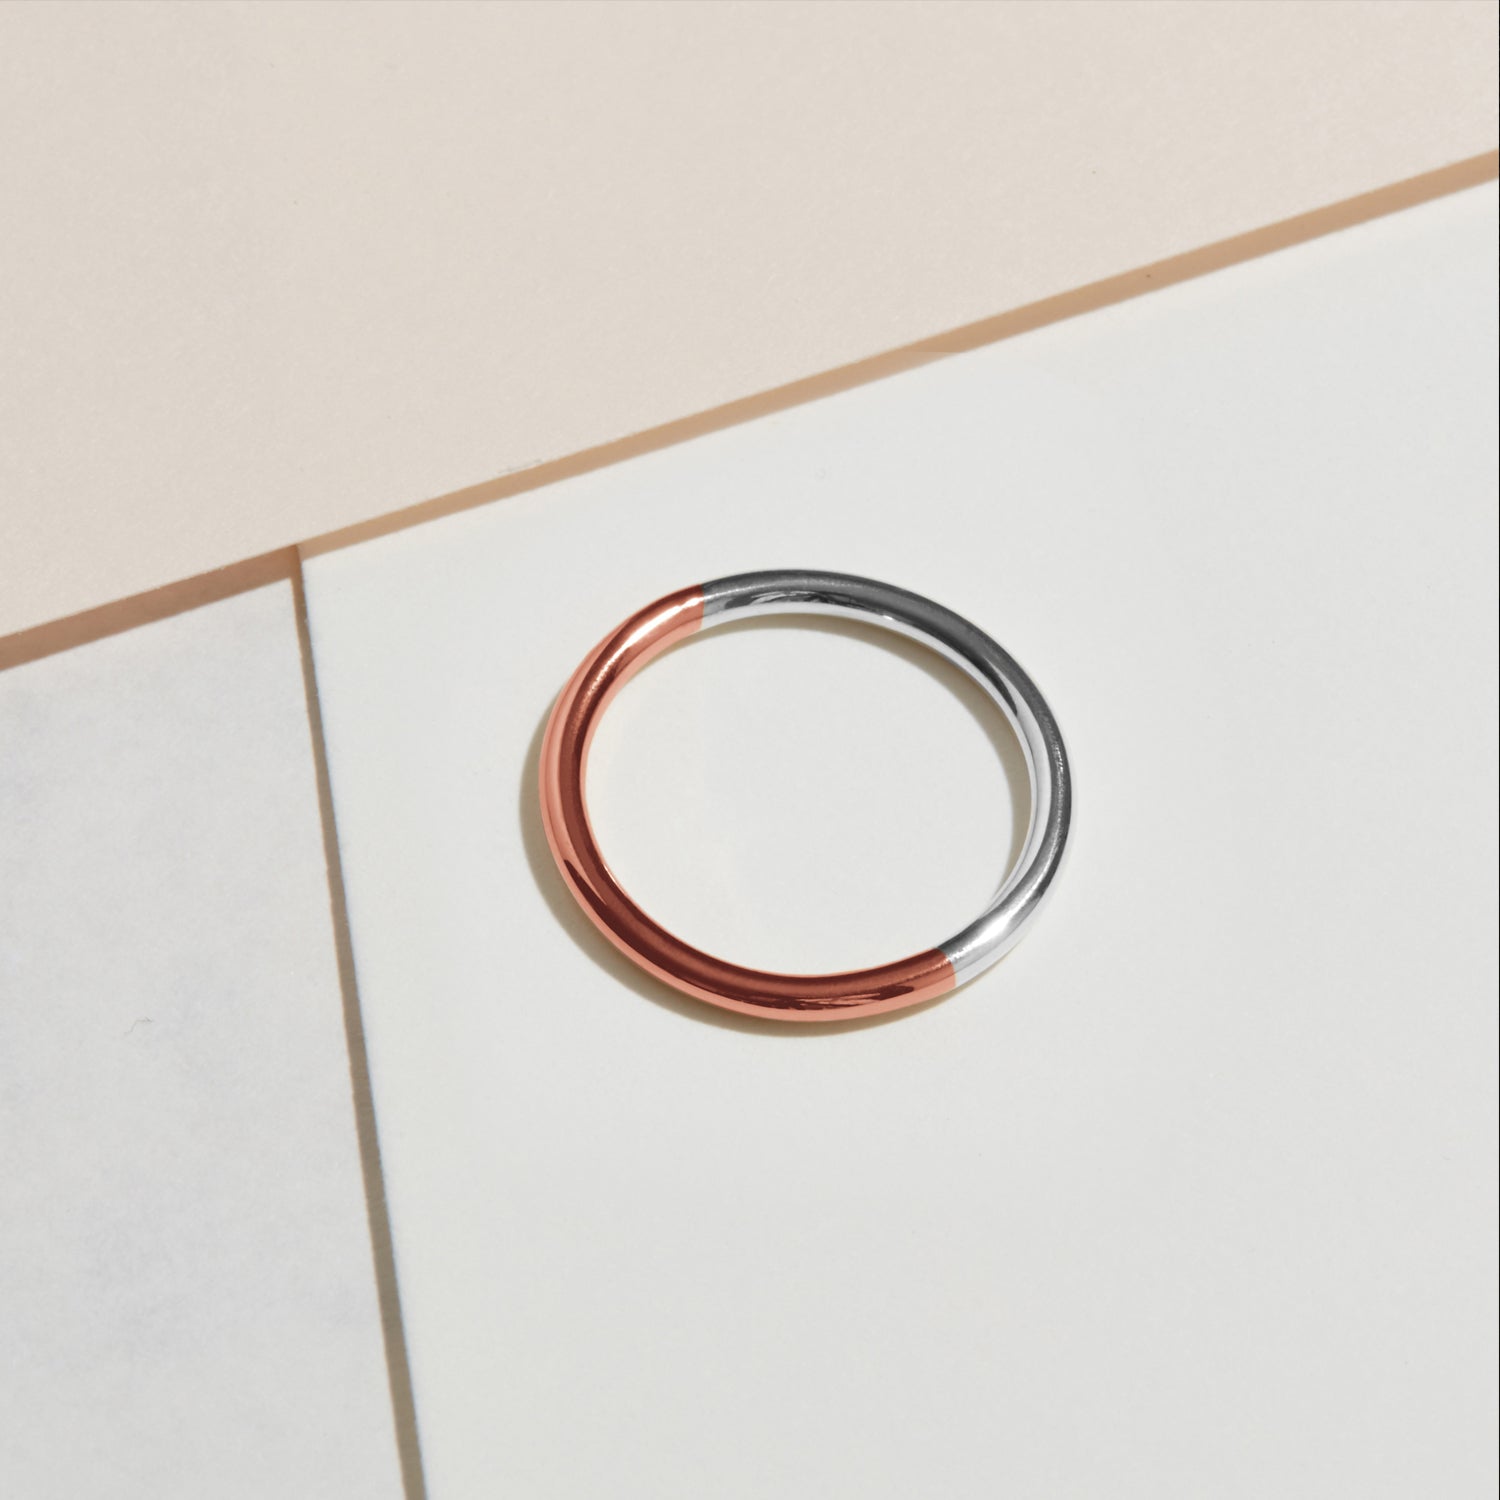 Two-tone Round Band - 9k Rose Gold & Silver - Myia Bonner Jewellery